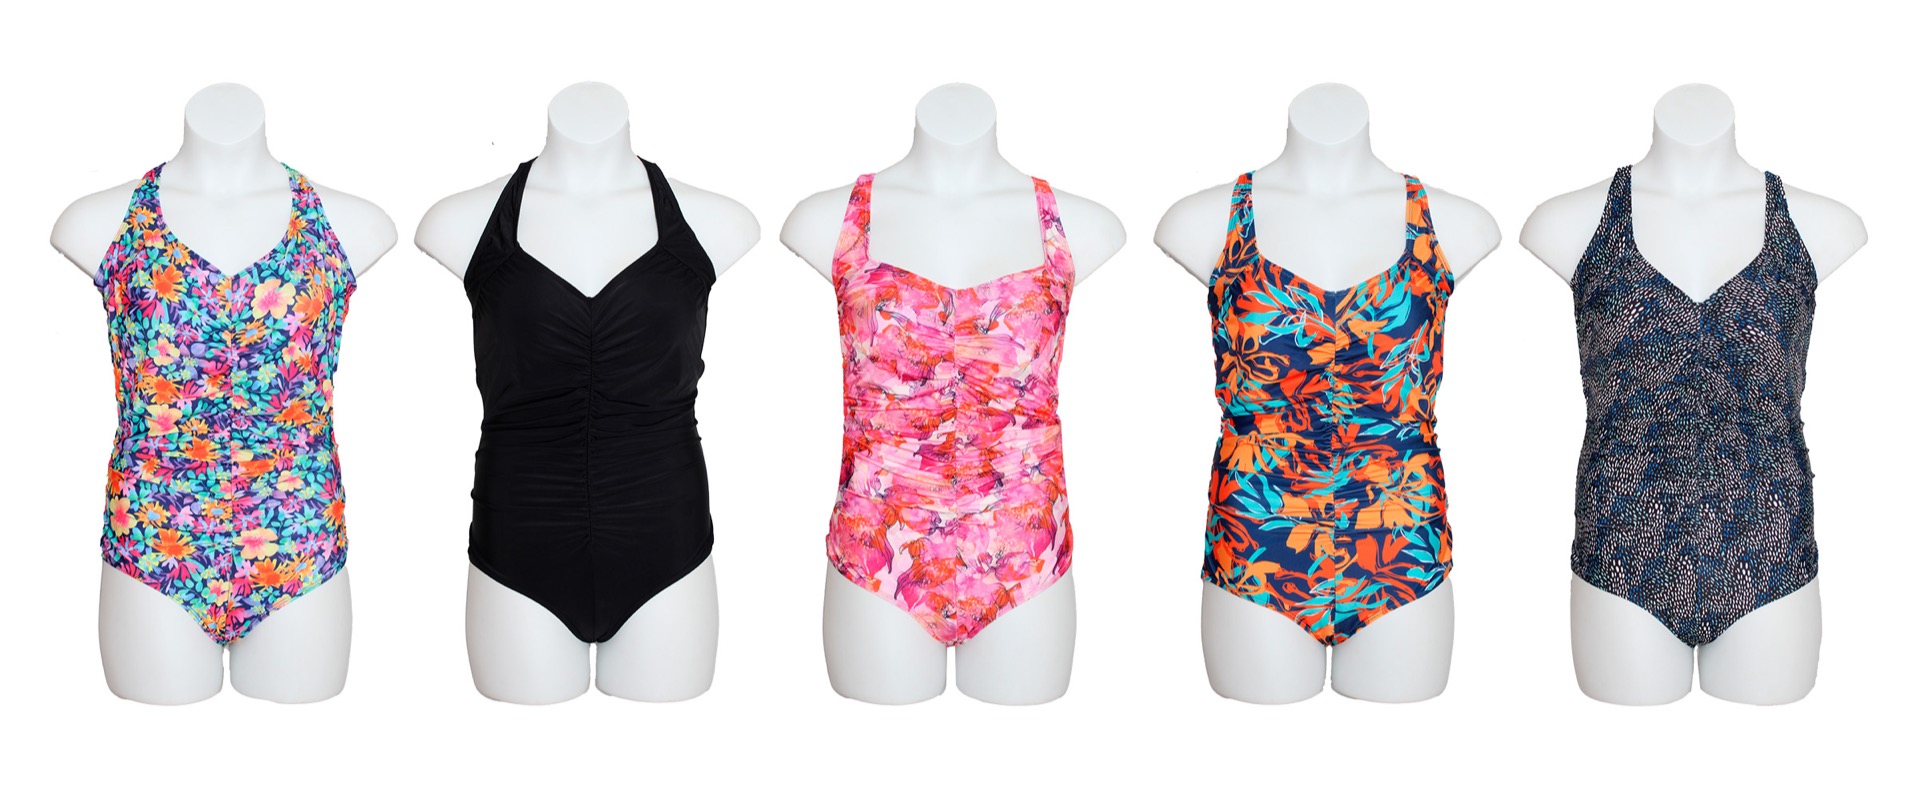 ''Women's Plus Size Printed One-Piece Fashion Swimsuits w/ Shirred Front - Tropical Floral, Reptile, 